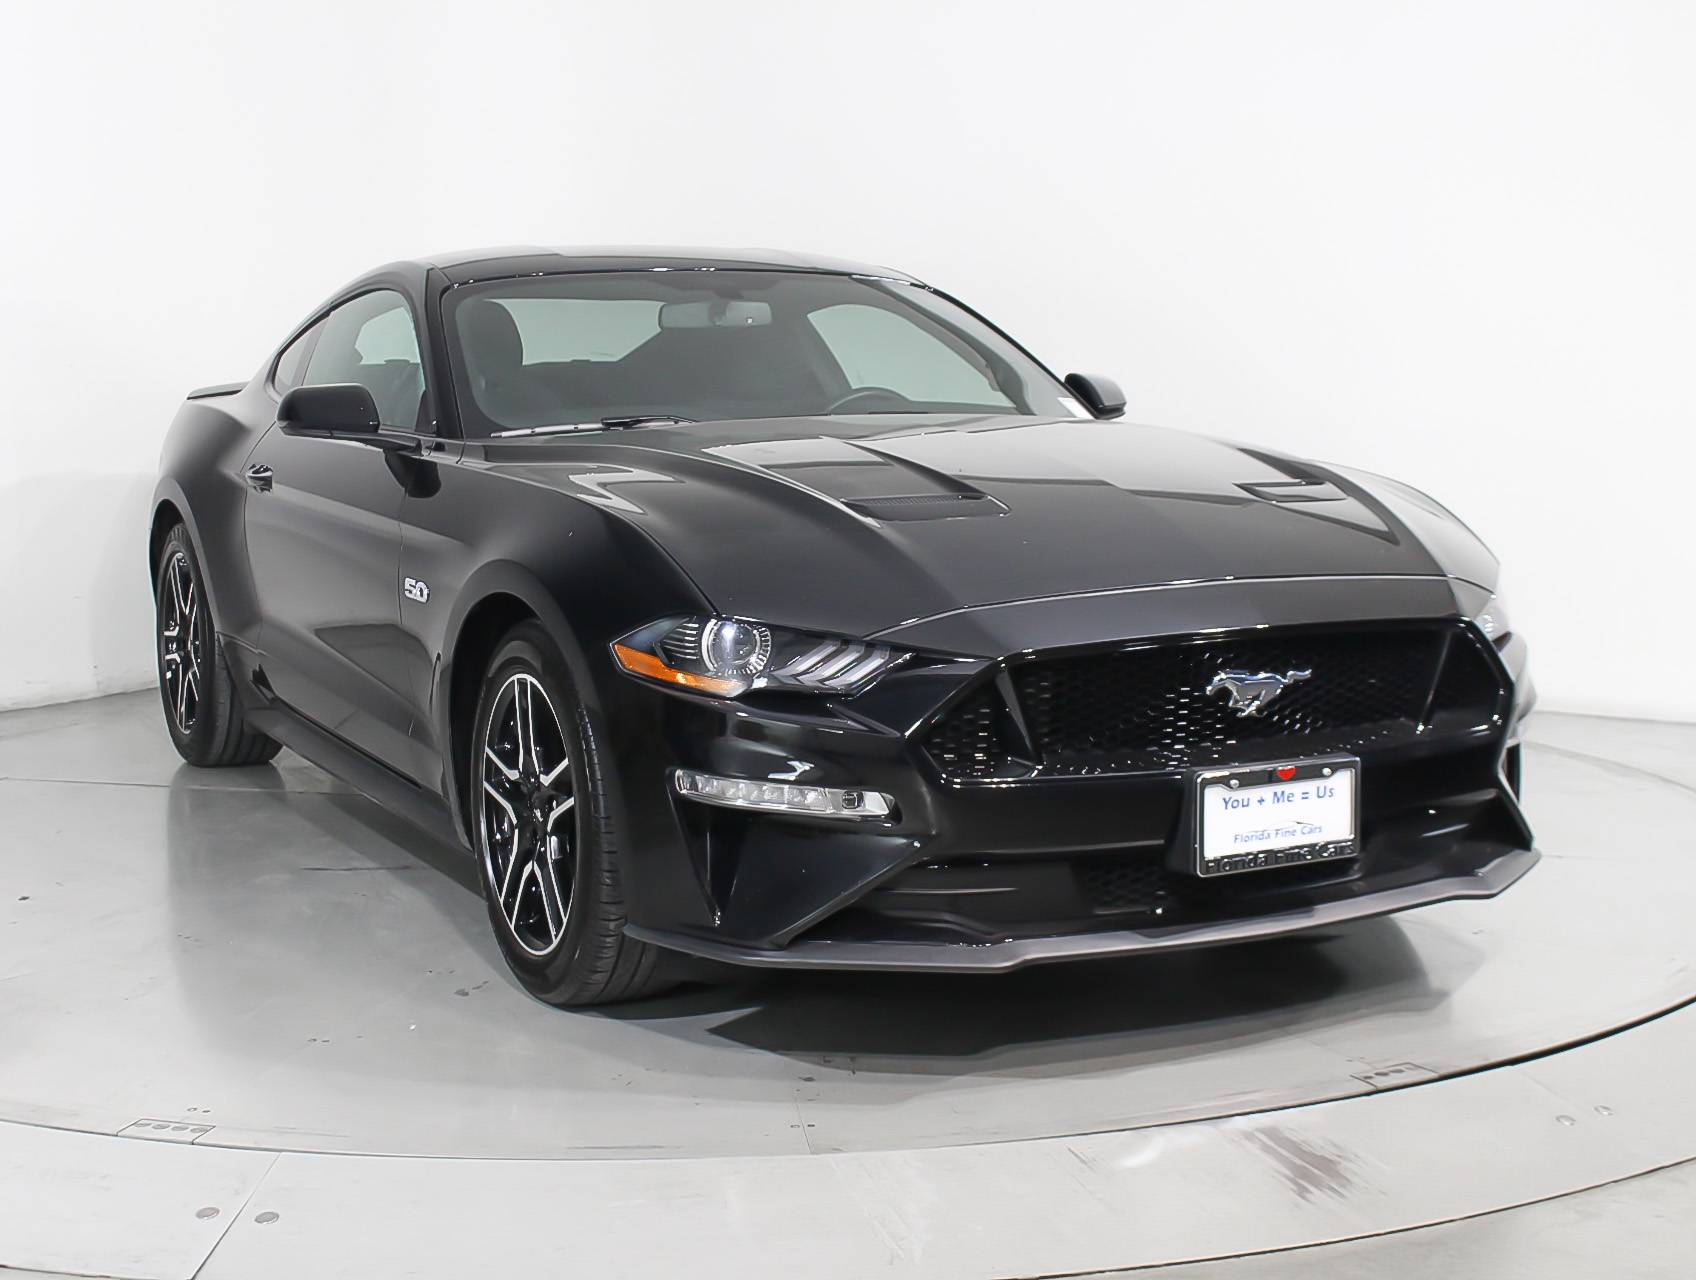 Florida Fine Cars - Used FORD MUSTANG 2019 MIAMI GT